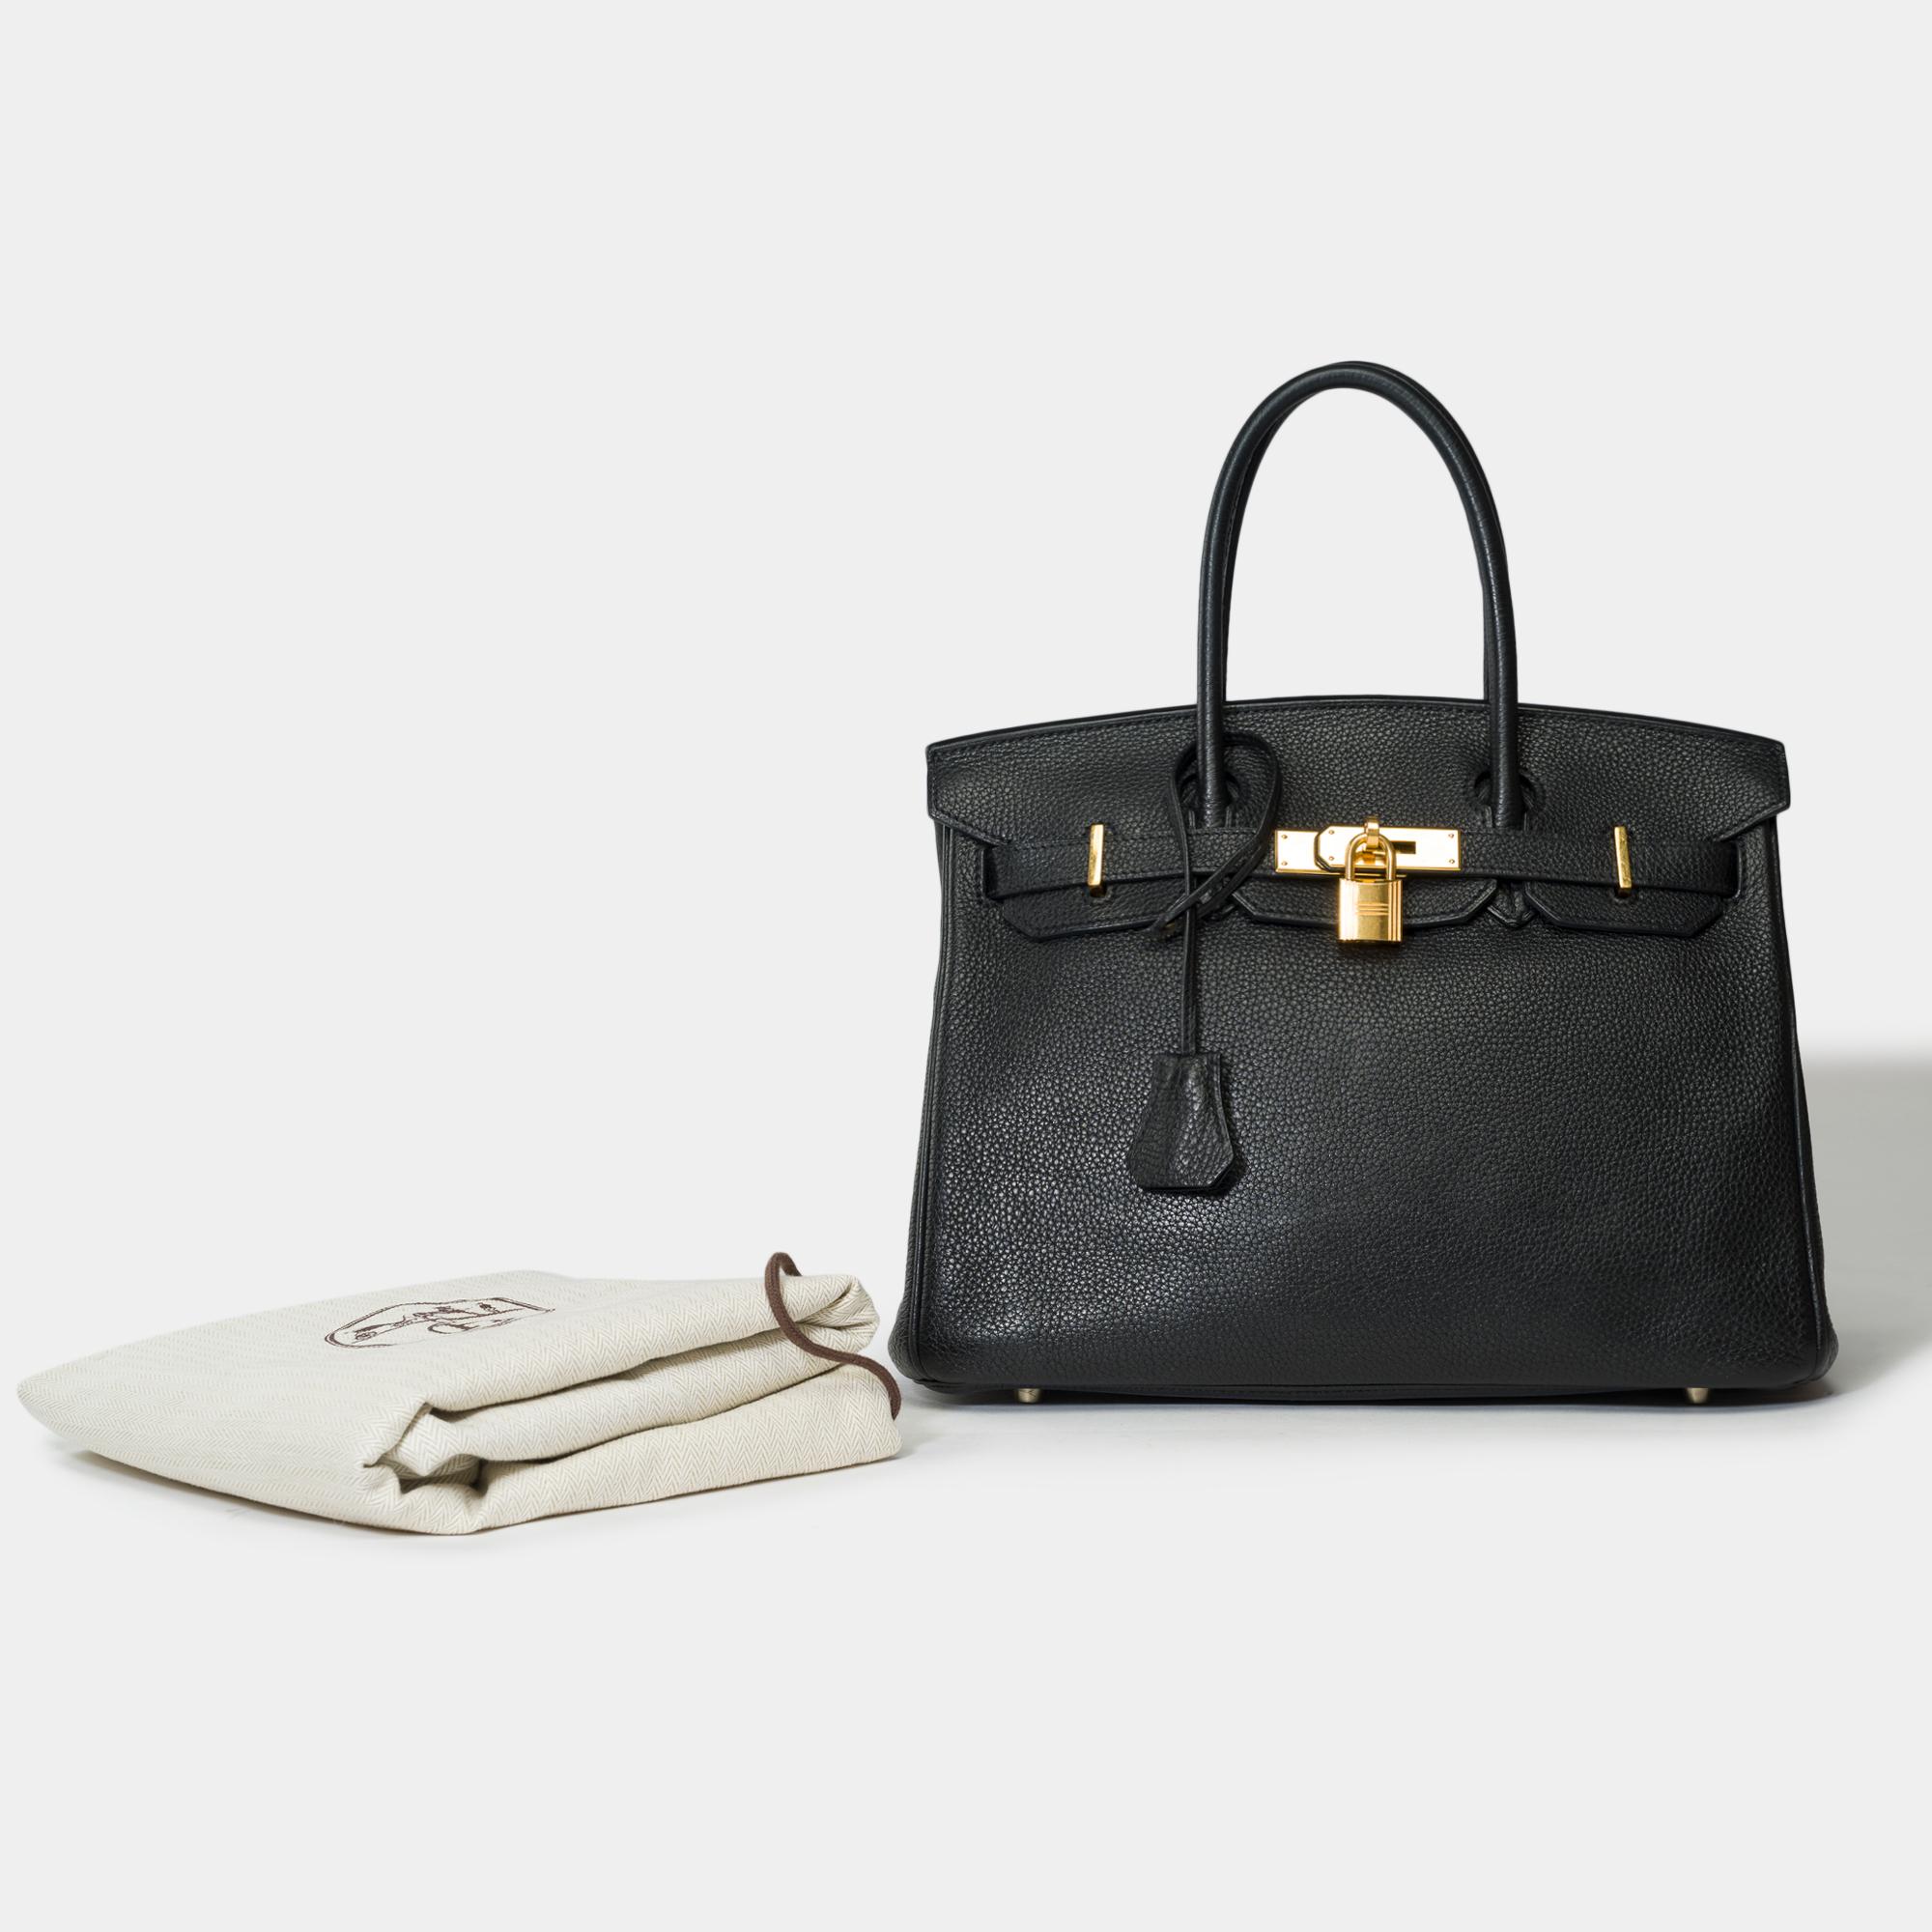 Stunning​ ​Hermes​ ​Birkin​ ​30​ ​in​ ​Black​ ​Togo​ ​leather,​ ​gold​ ​plated​ ​metal​ ​trim​ ​,​ ​double​ ​handle​ ​in​ ​black​ ​leather​ ​allowing​ ​a​ ​hand​ ​carry

Flap​ ​closure
Black​ ​leather​ ​inner​ ​lining​ ​,​ ​a​ ​zippered​ ​pocket,​